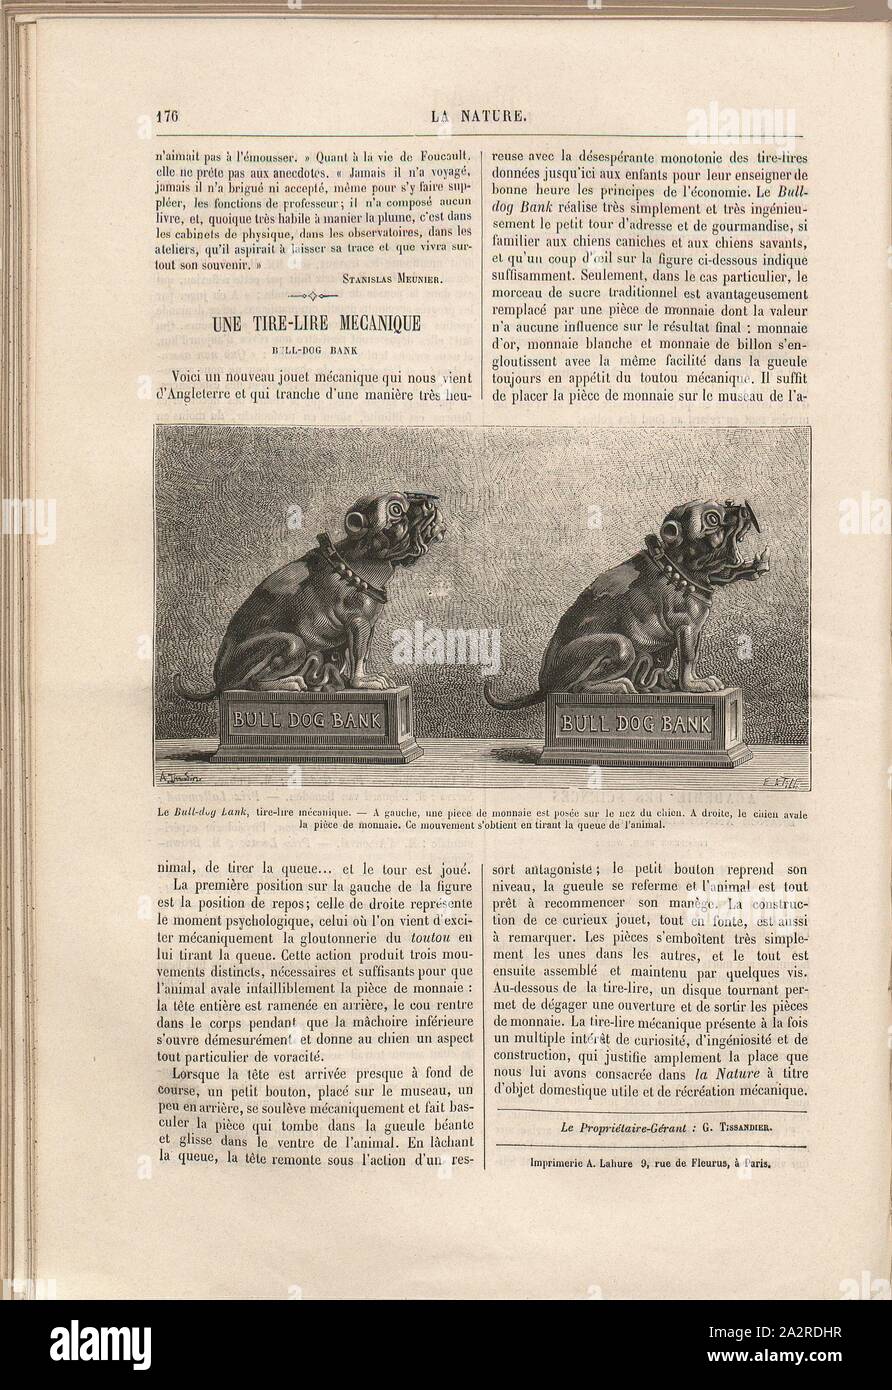 The Bull-dog Bank, mechanical tire puller. - On the left, a coin is placed on the dog's nose. On the right, the dog swallows the coin. This movement is obtained by pulling the tail of the animal, Mechanical money-box in the shape of a bulldog, Signed: A. Tissandier ?; E. A. Tibbe ?, p. 176, 1882, Science progrès découverte: revue publiée avec la participation de la Société des Ingénieurs Civils de France. No. 10. Paris: Dunod, 1882 Stock Photo